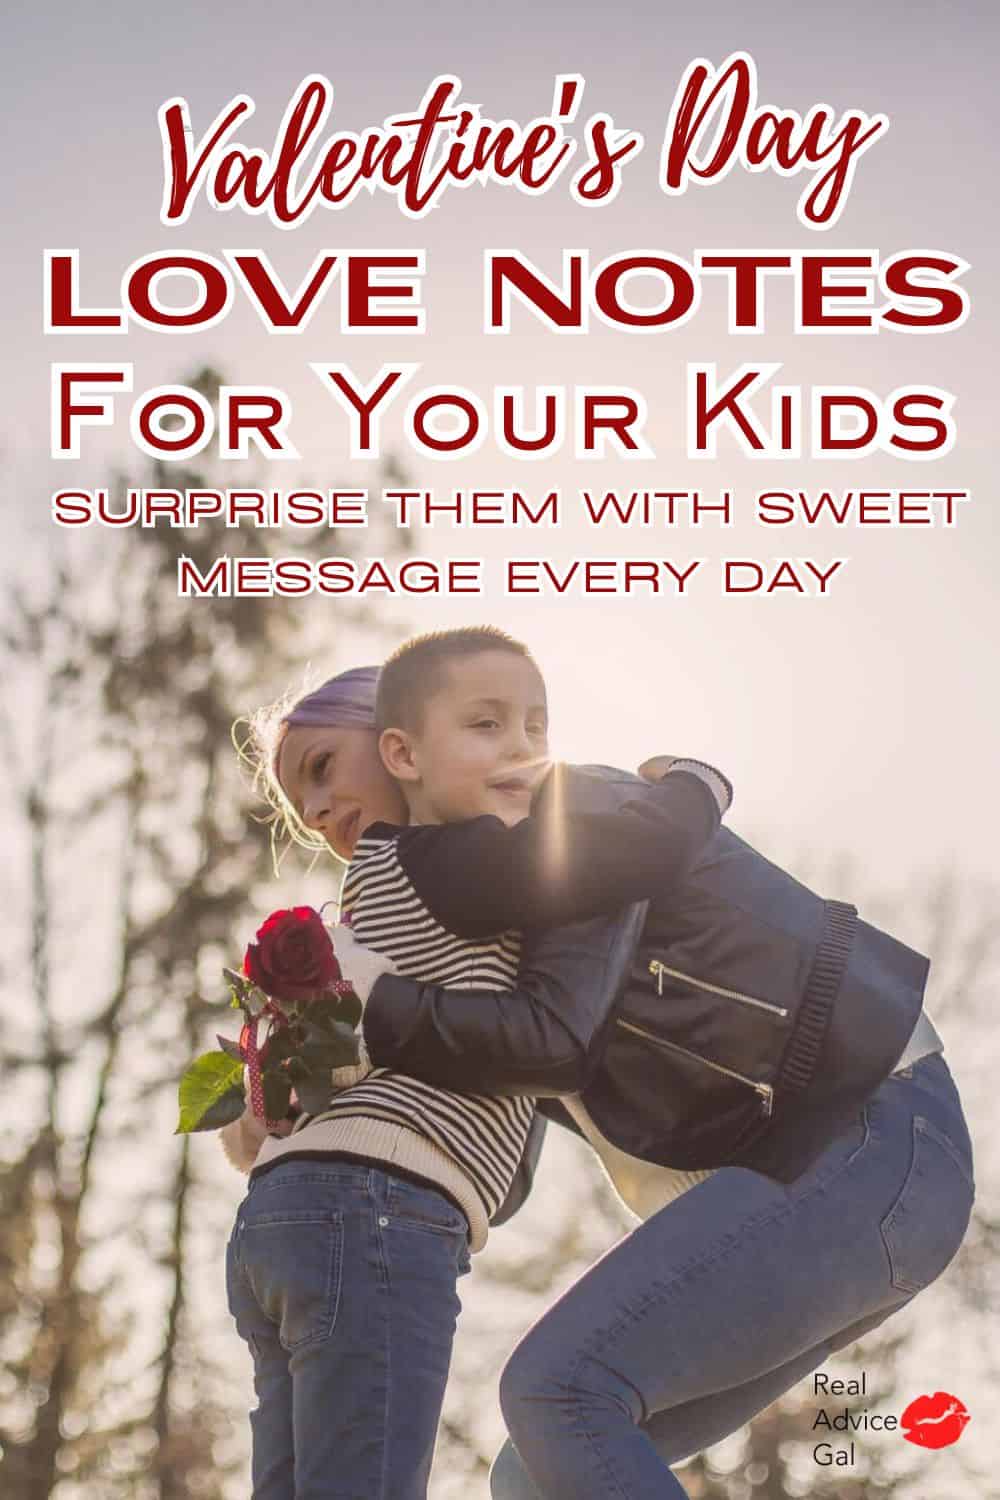 Valentine’s Day Love Notes to Surprise Your Kids